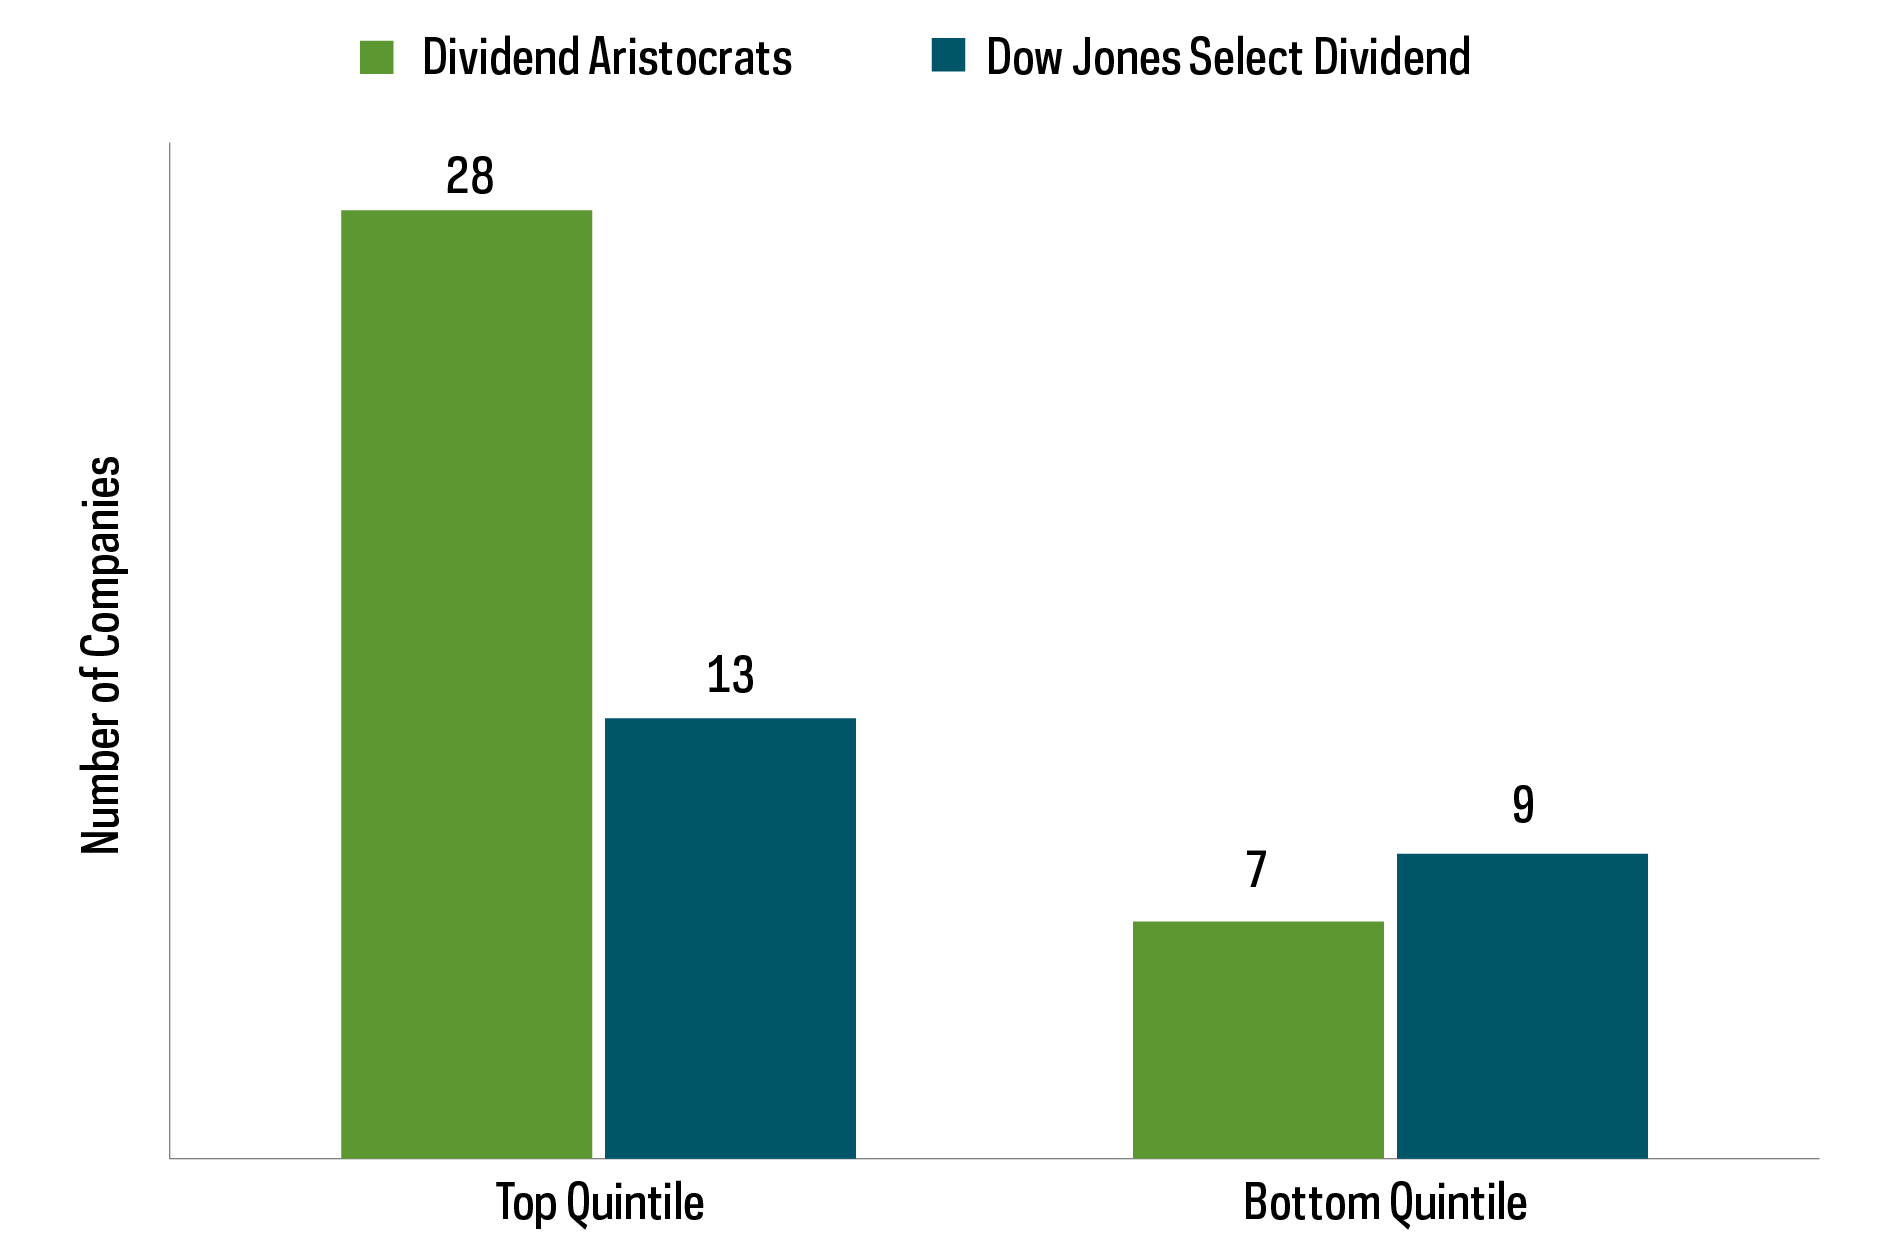 The two charts below break down the S&P 500 Dividend Aristocrats Index (dividend growers) versus the Dow Jones U.S. Select Divideend Index (high dividend yielders showing the top and bottom quintiles of each measured first by credit rating quality and second by higher versus lower yieldes, reflecting that dividend growers are typically of higher credit quality and less divided risk versus the high diovidend yielders, holdings as of 3/31/20; credit ratings and yields as of 12/31/19.